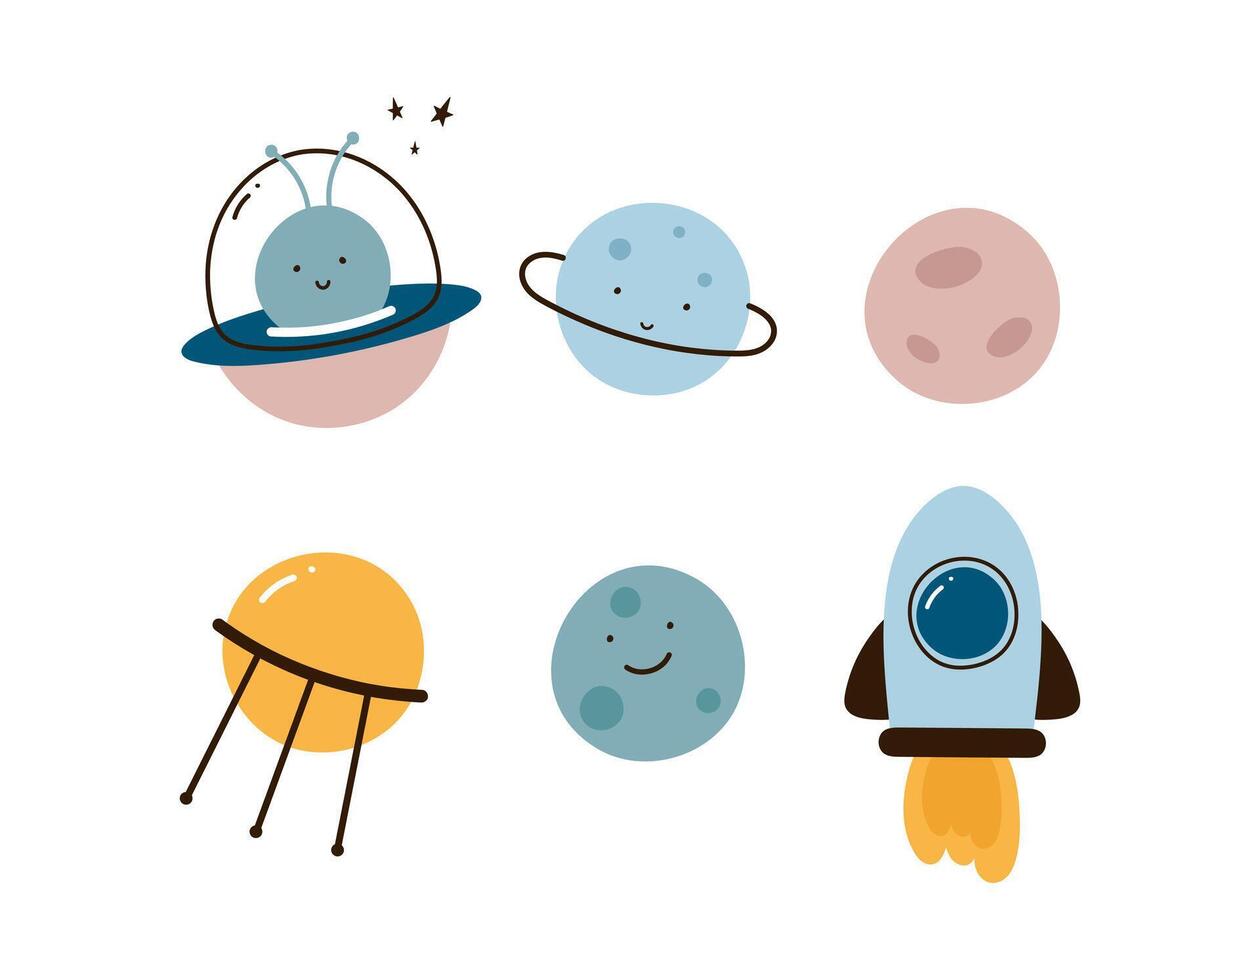 Space set with cute planets, rocket, flying saucer, alien, satellite. Cartoon flat style. Vector illustration.